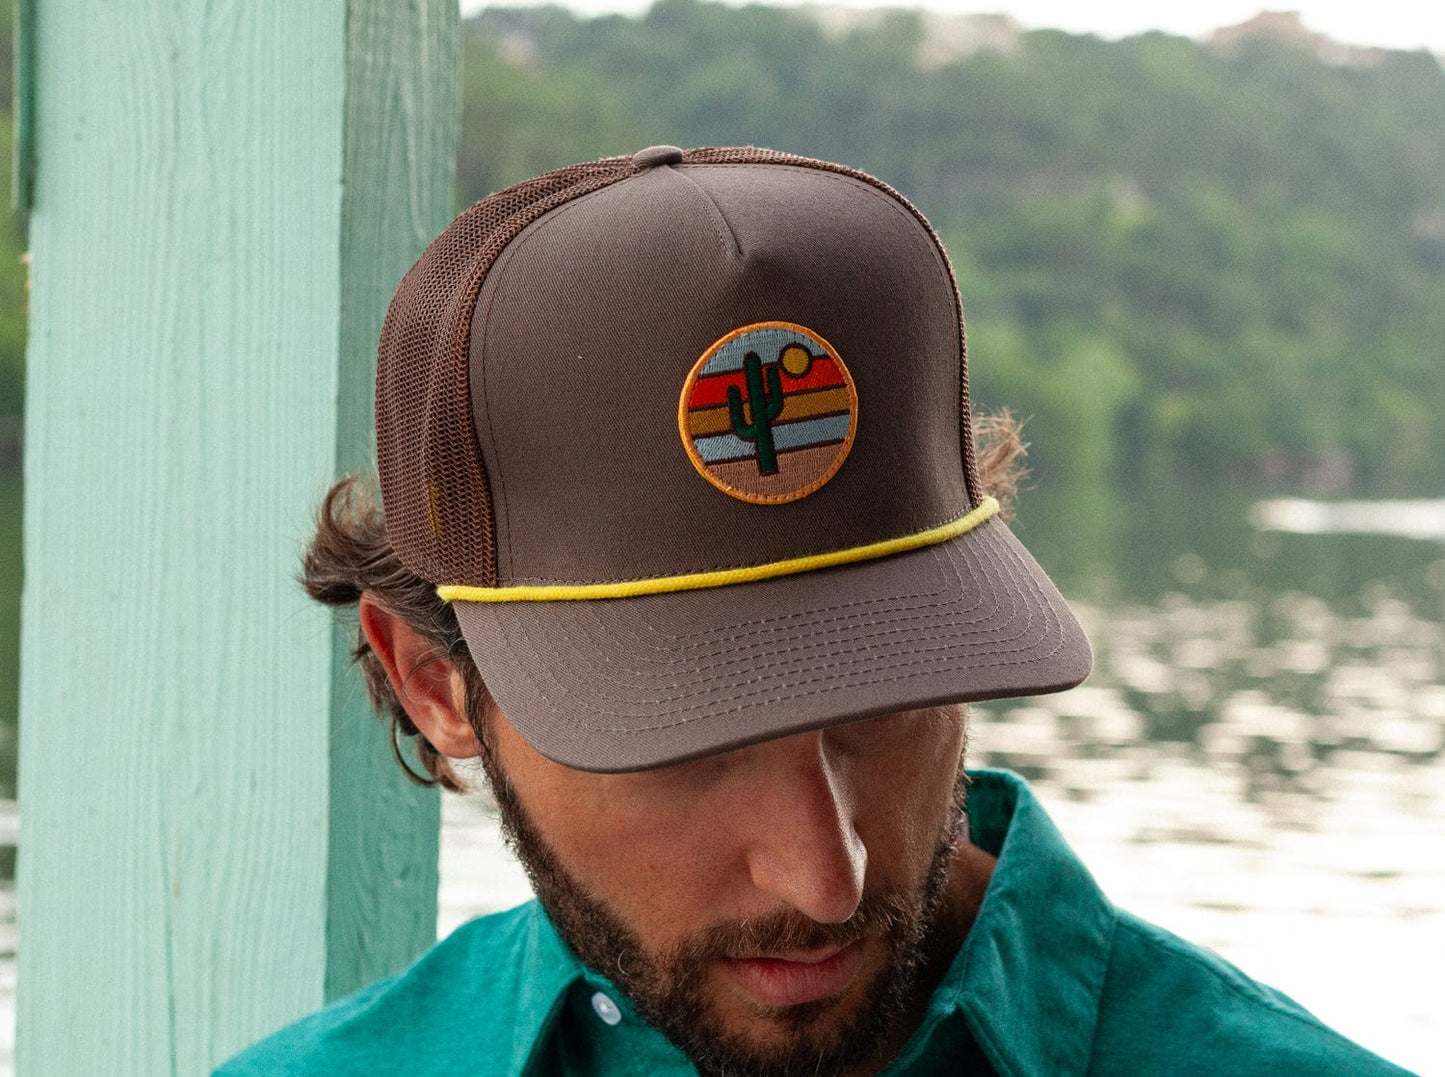 Classic Trucker Hat - Cactus Patch - Brown